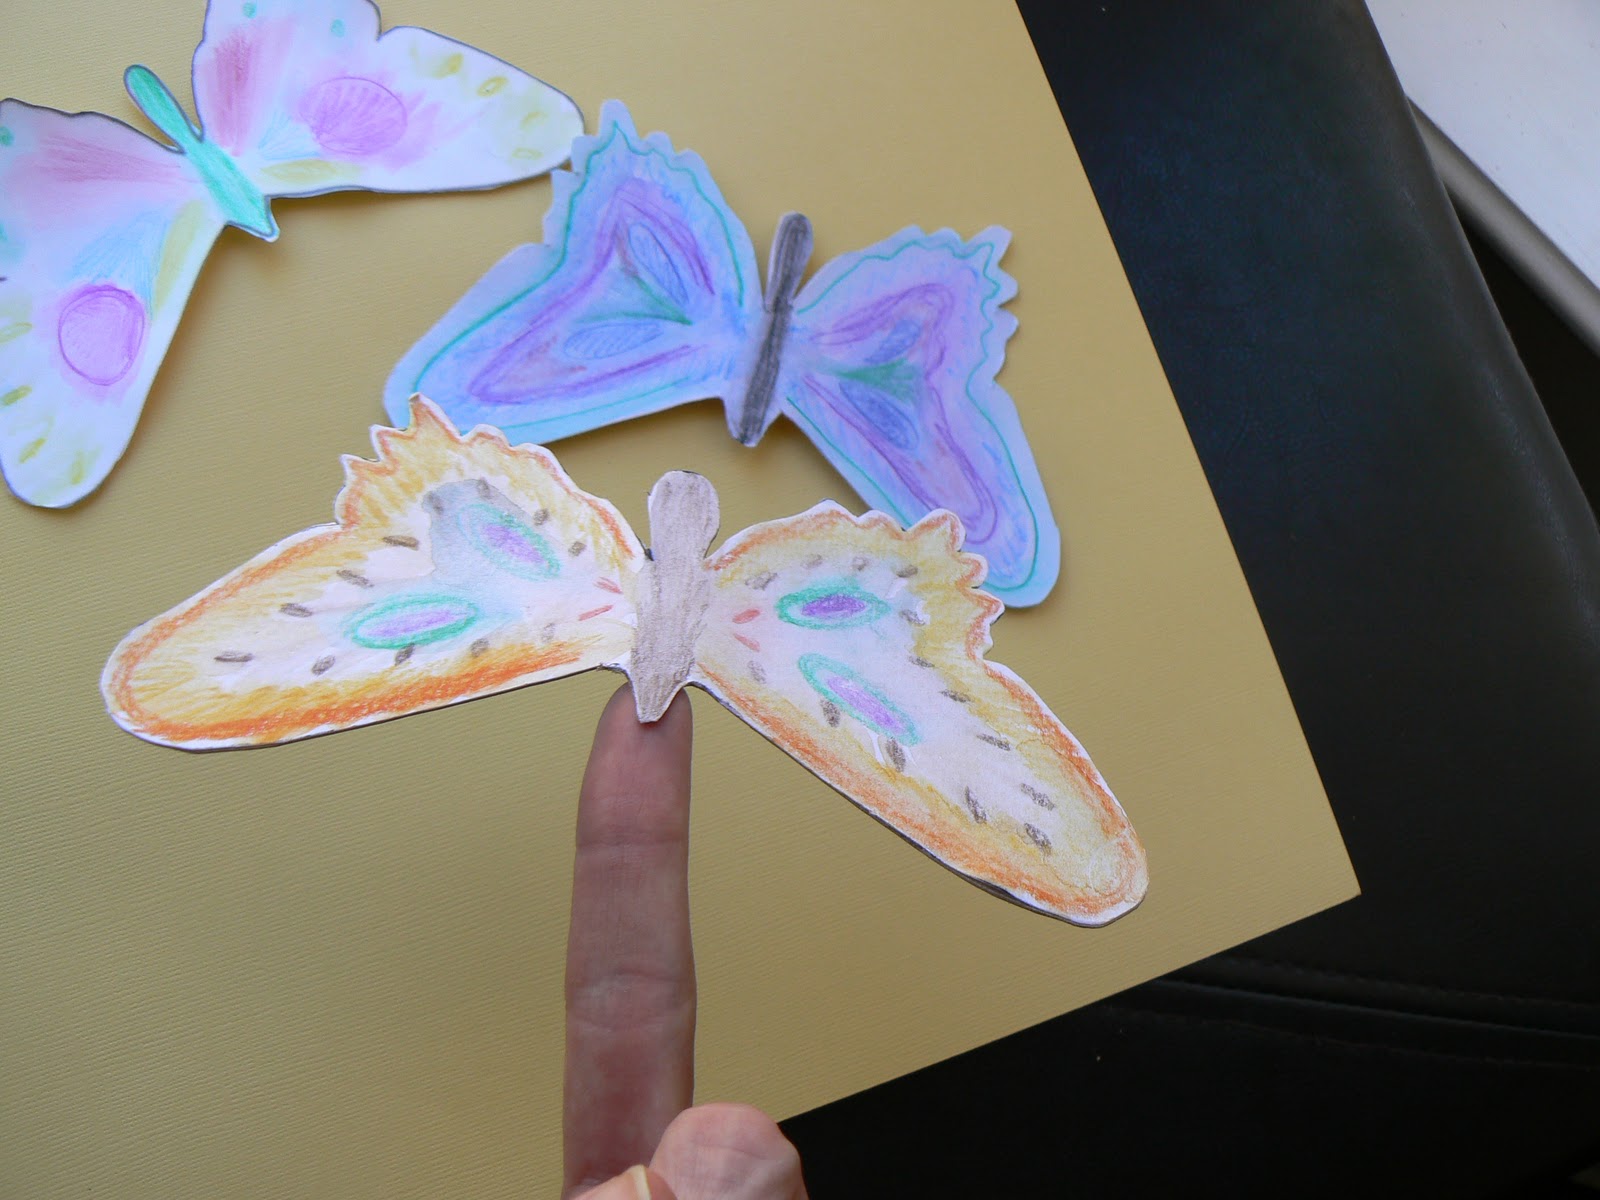 Flapping Butterfly Craft - One Little Project